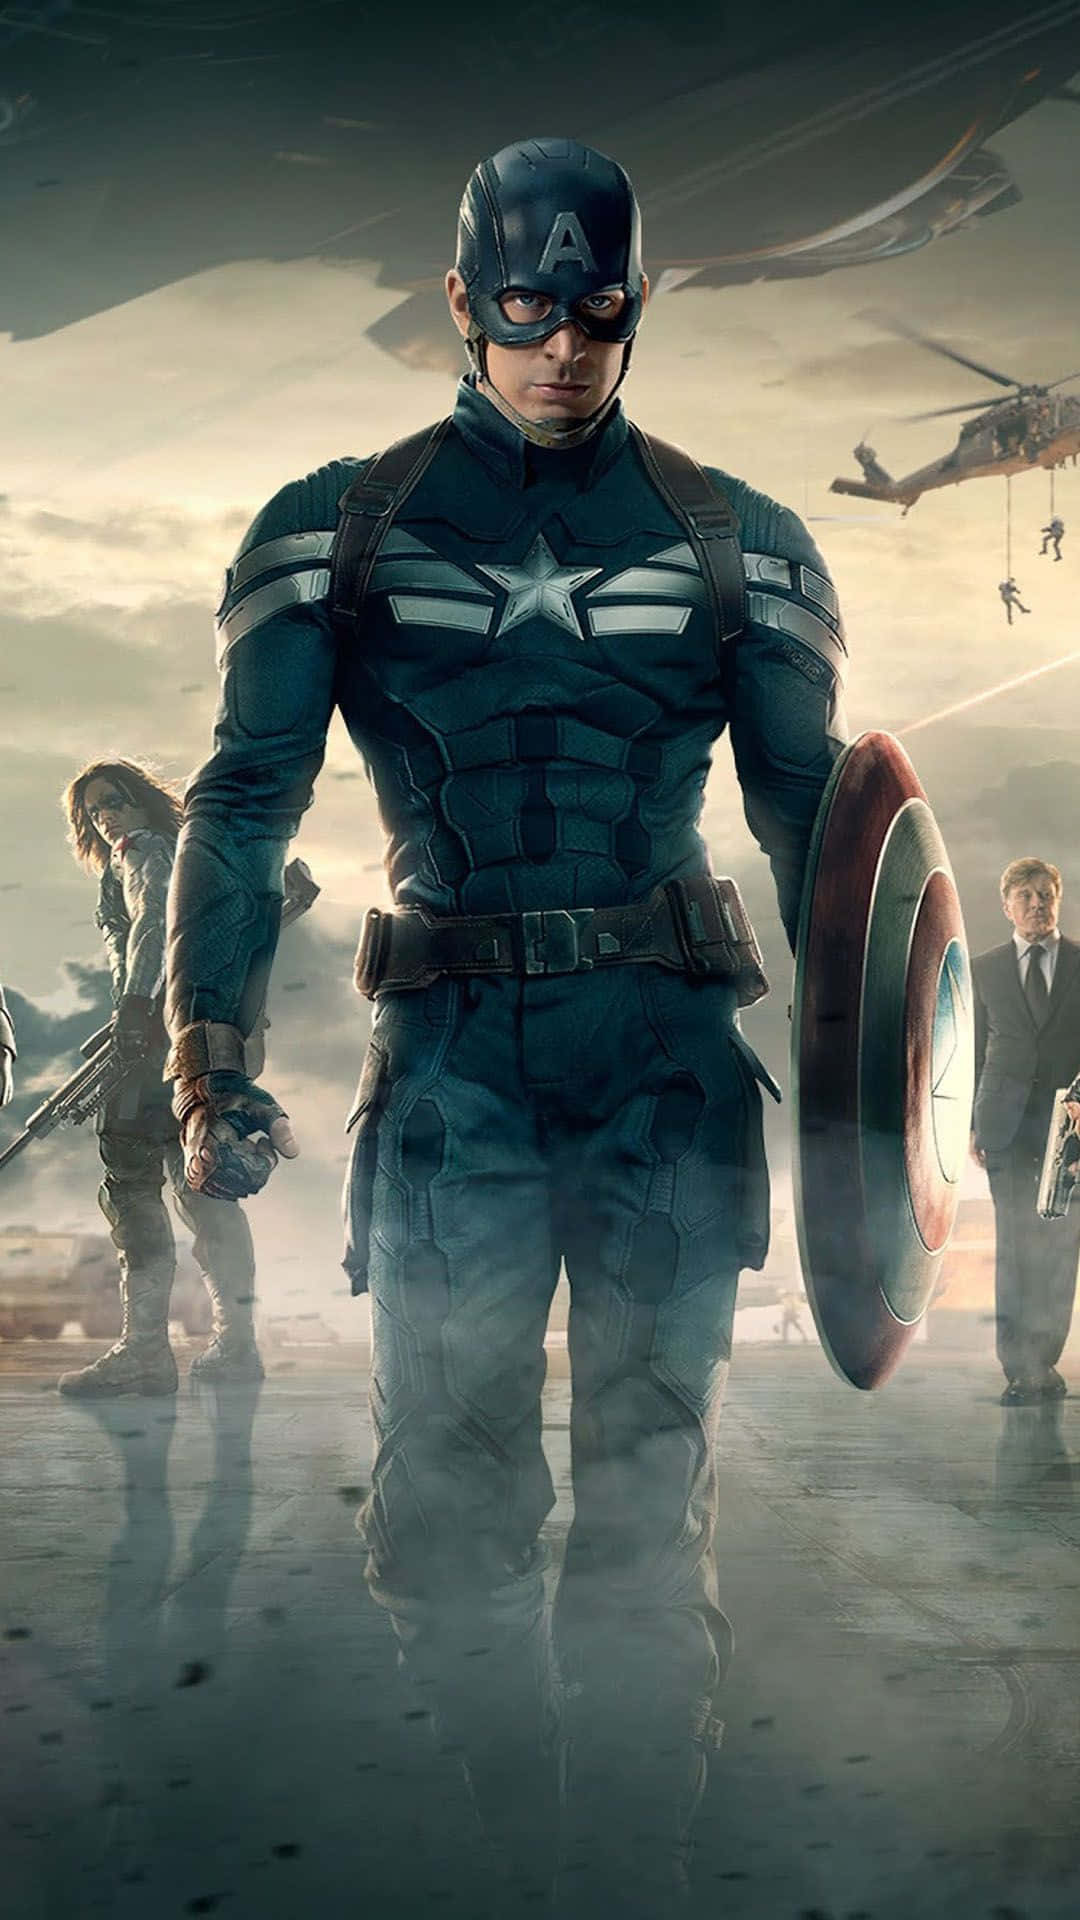 Captain America taking on the Android World